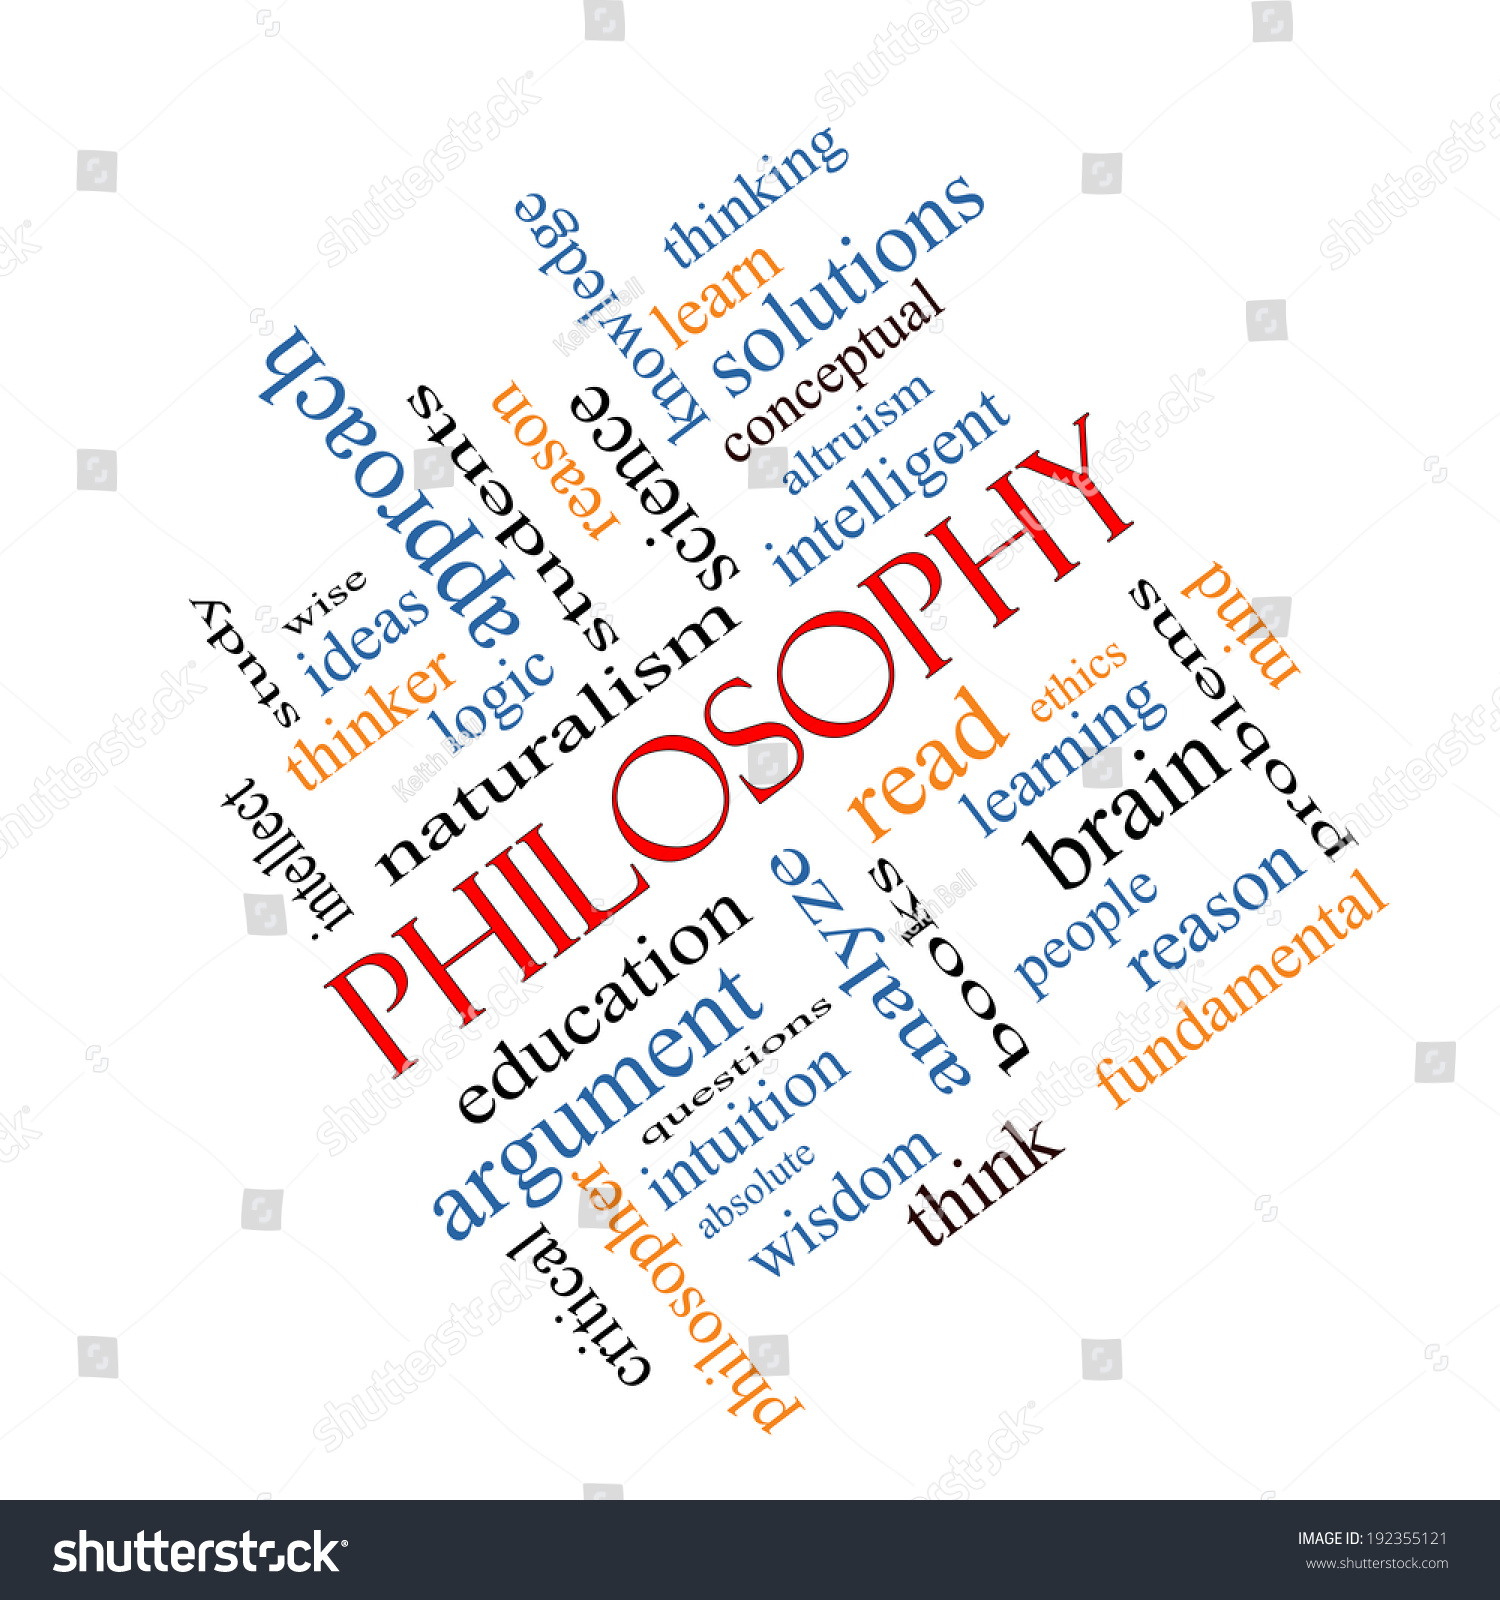 Glossary of philosophy